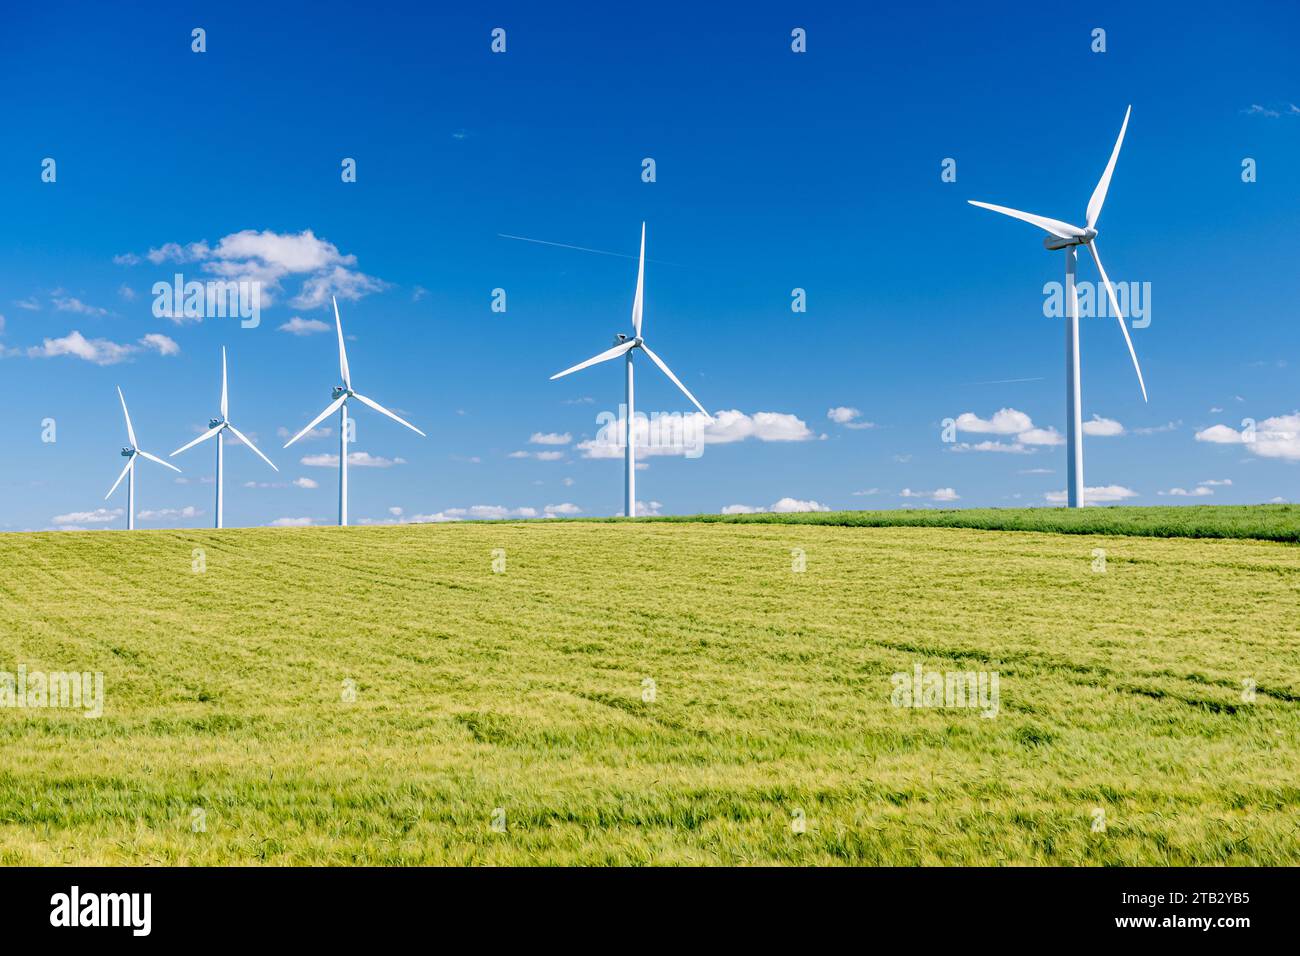 Wind farm: wind turbines in the middle of cultivated fields. Five wind turbines in a row. Field of bere Stock Photo